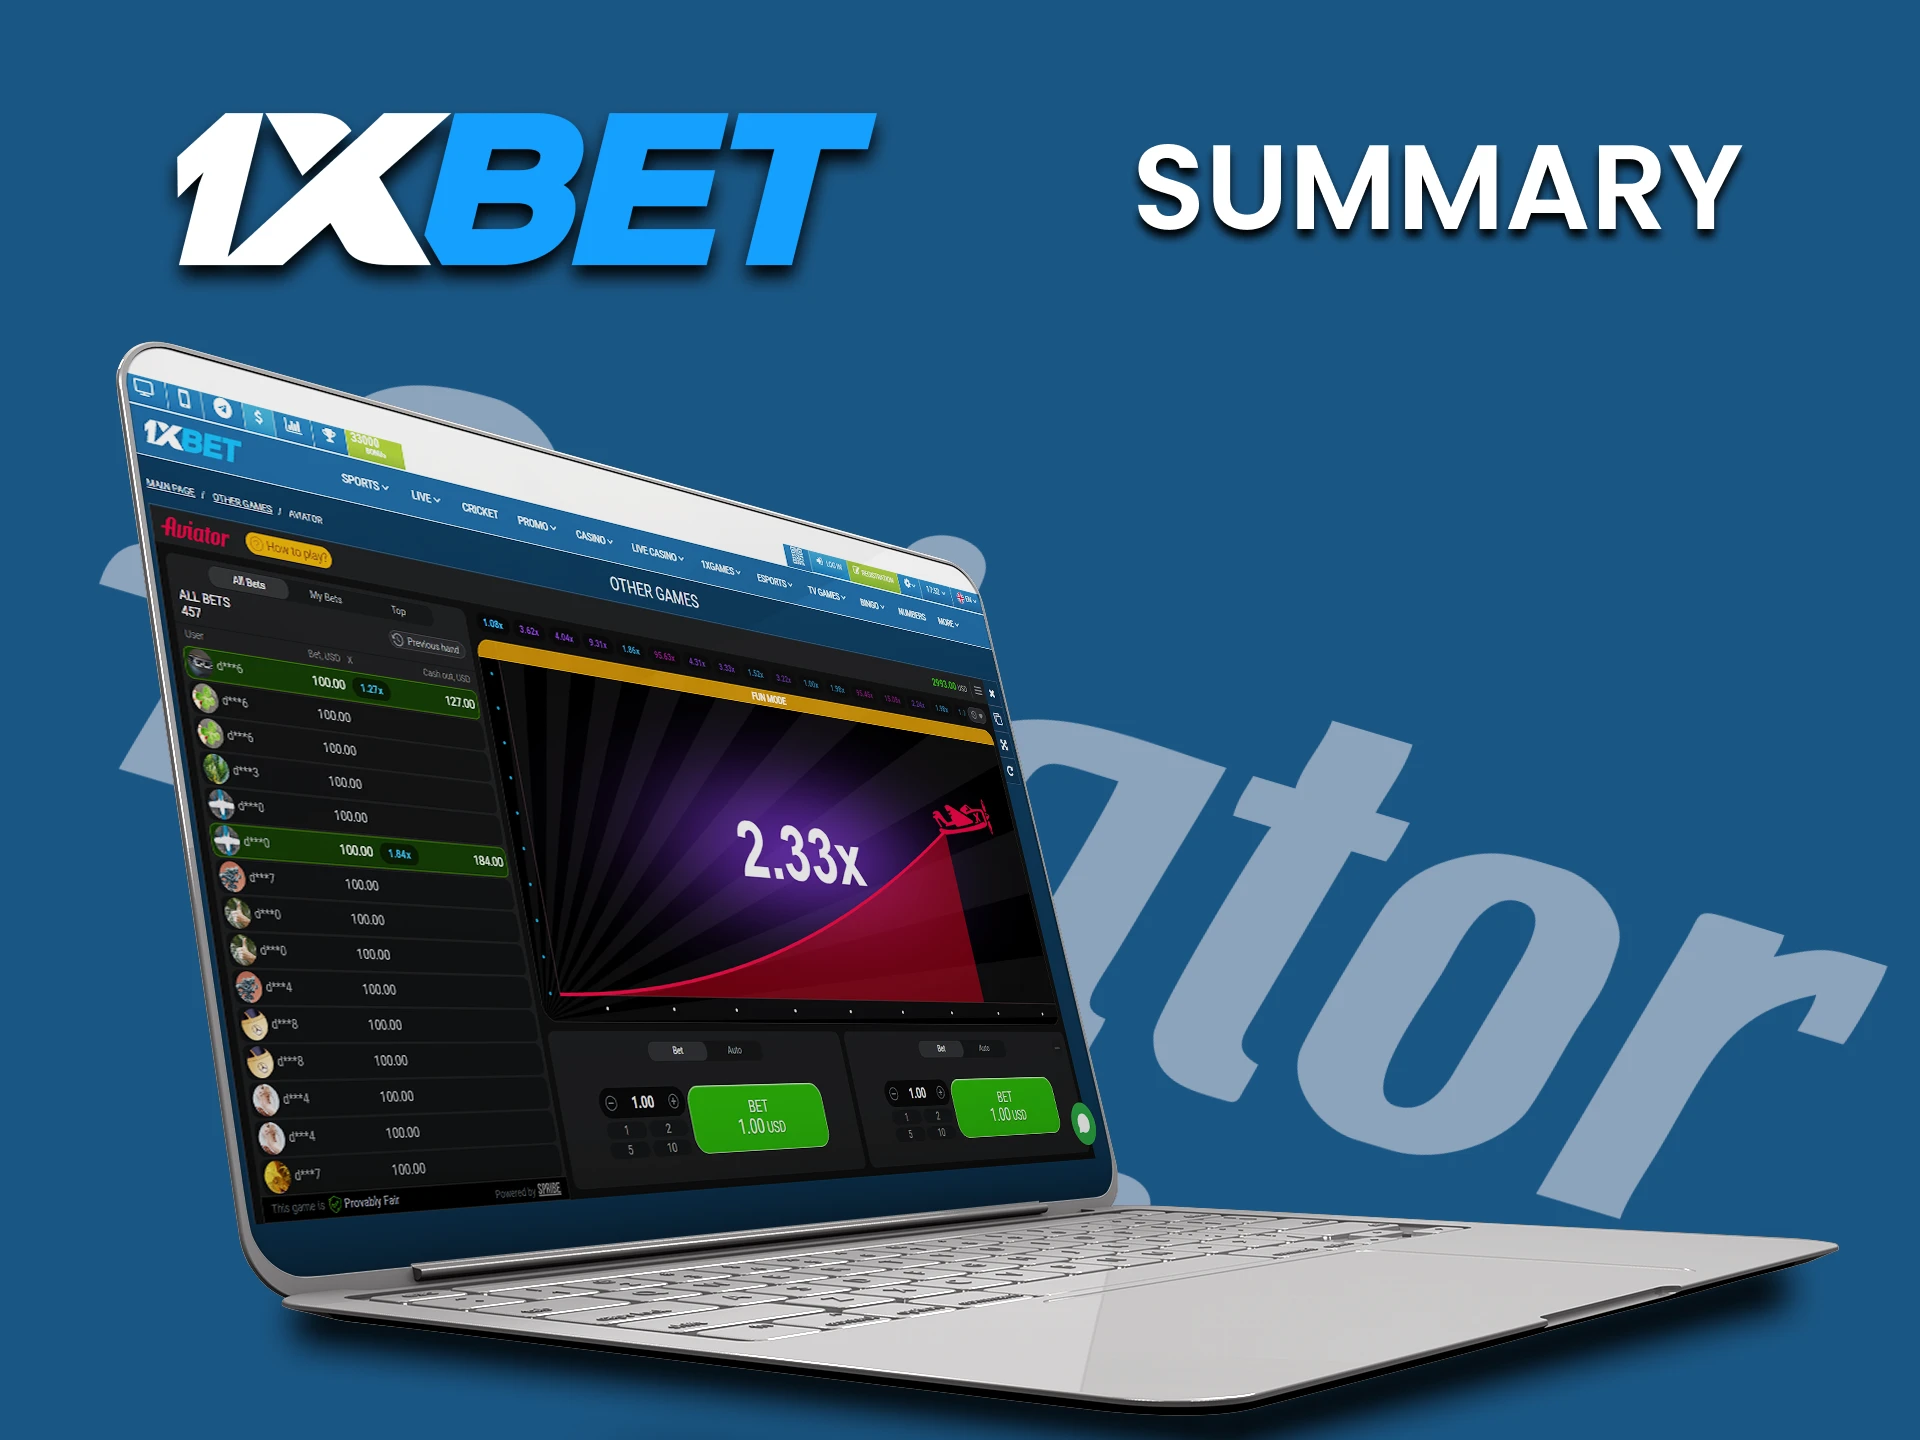 By choosing the right strategy, you will definitely win the Aviator game on 1xbet.